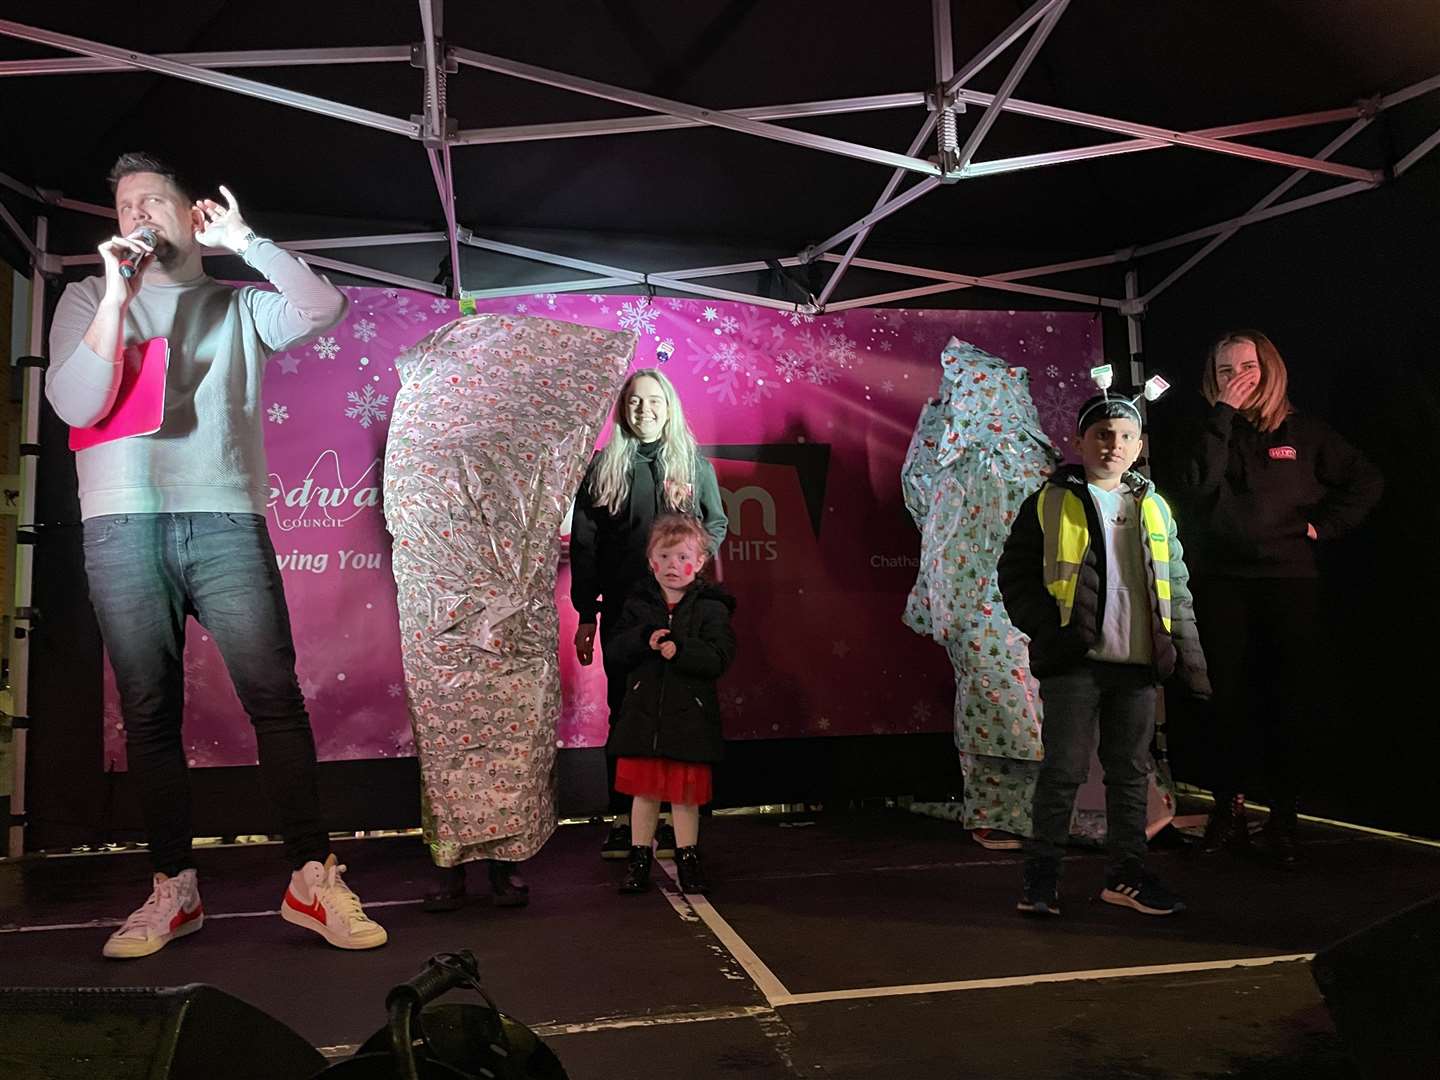 Two lucky children got to wrap an unusual present – their mothers – on stage